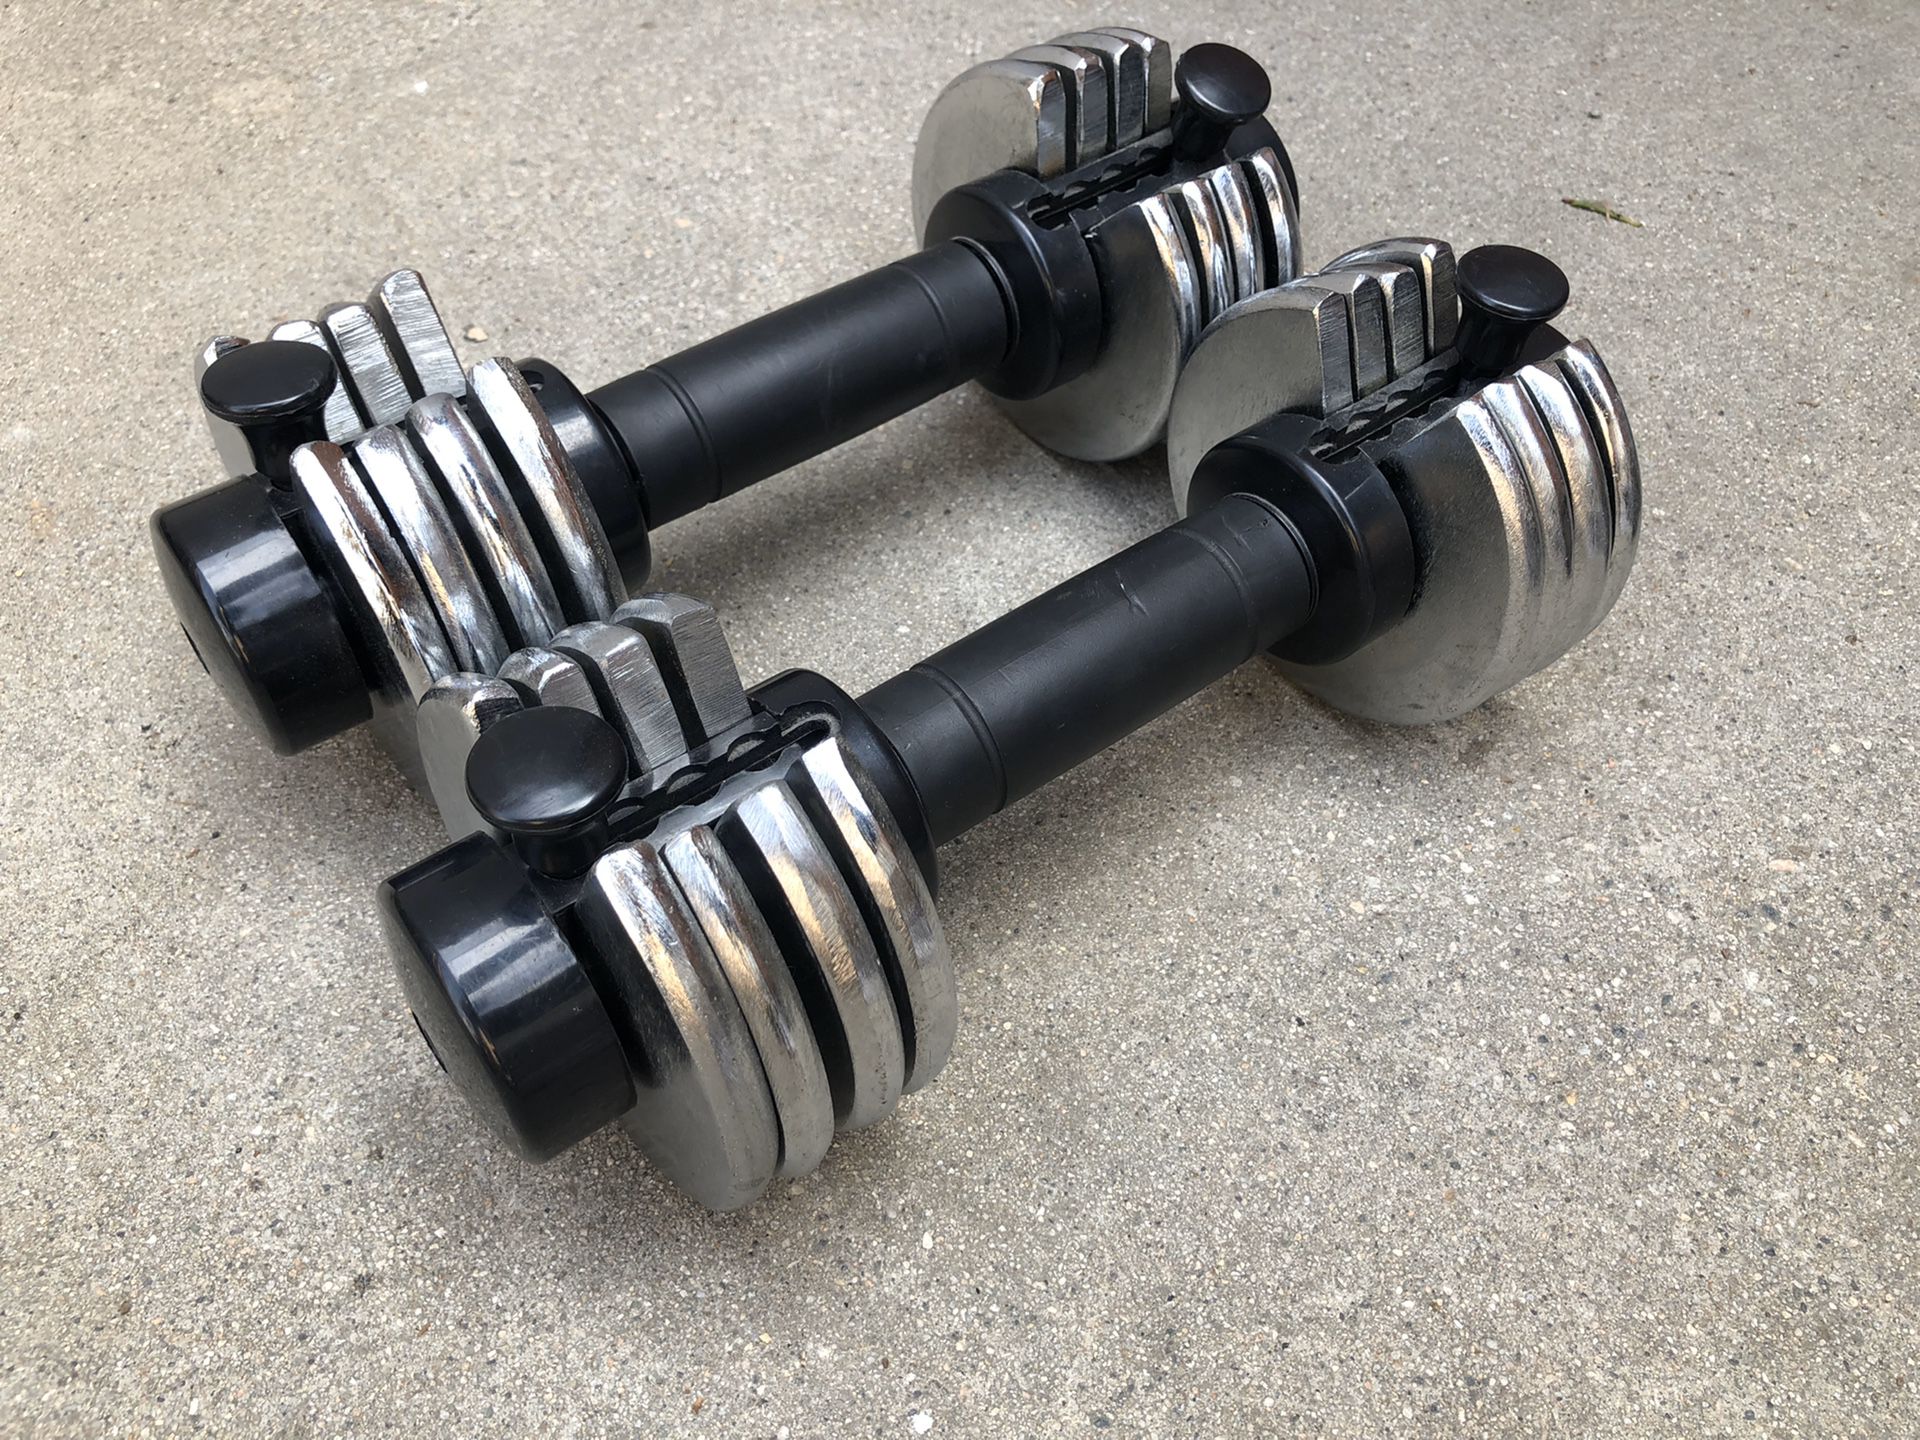 Adjustable dumbbells 12.5 lb each in clean solid condition